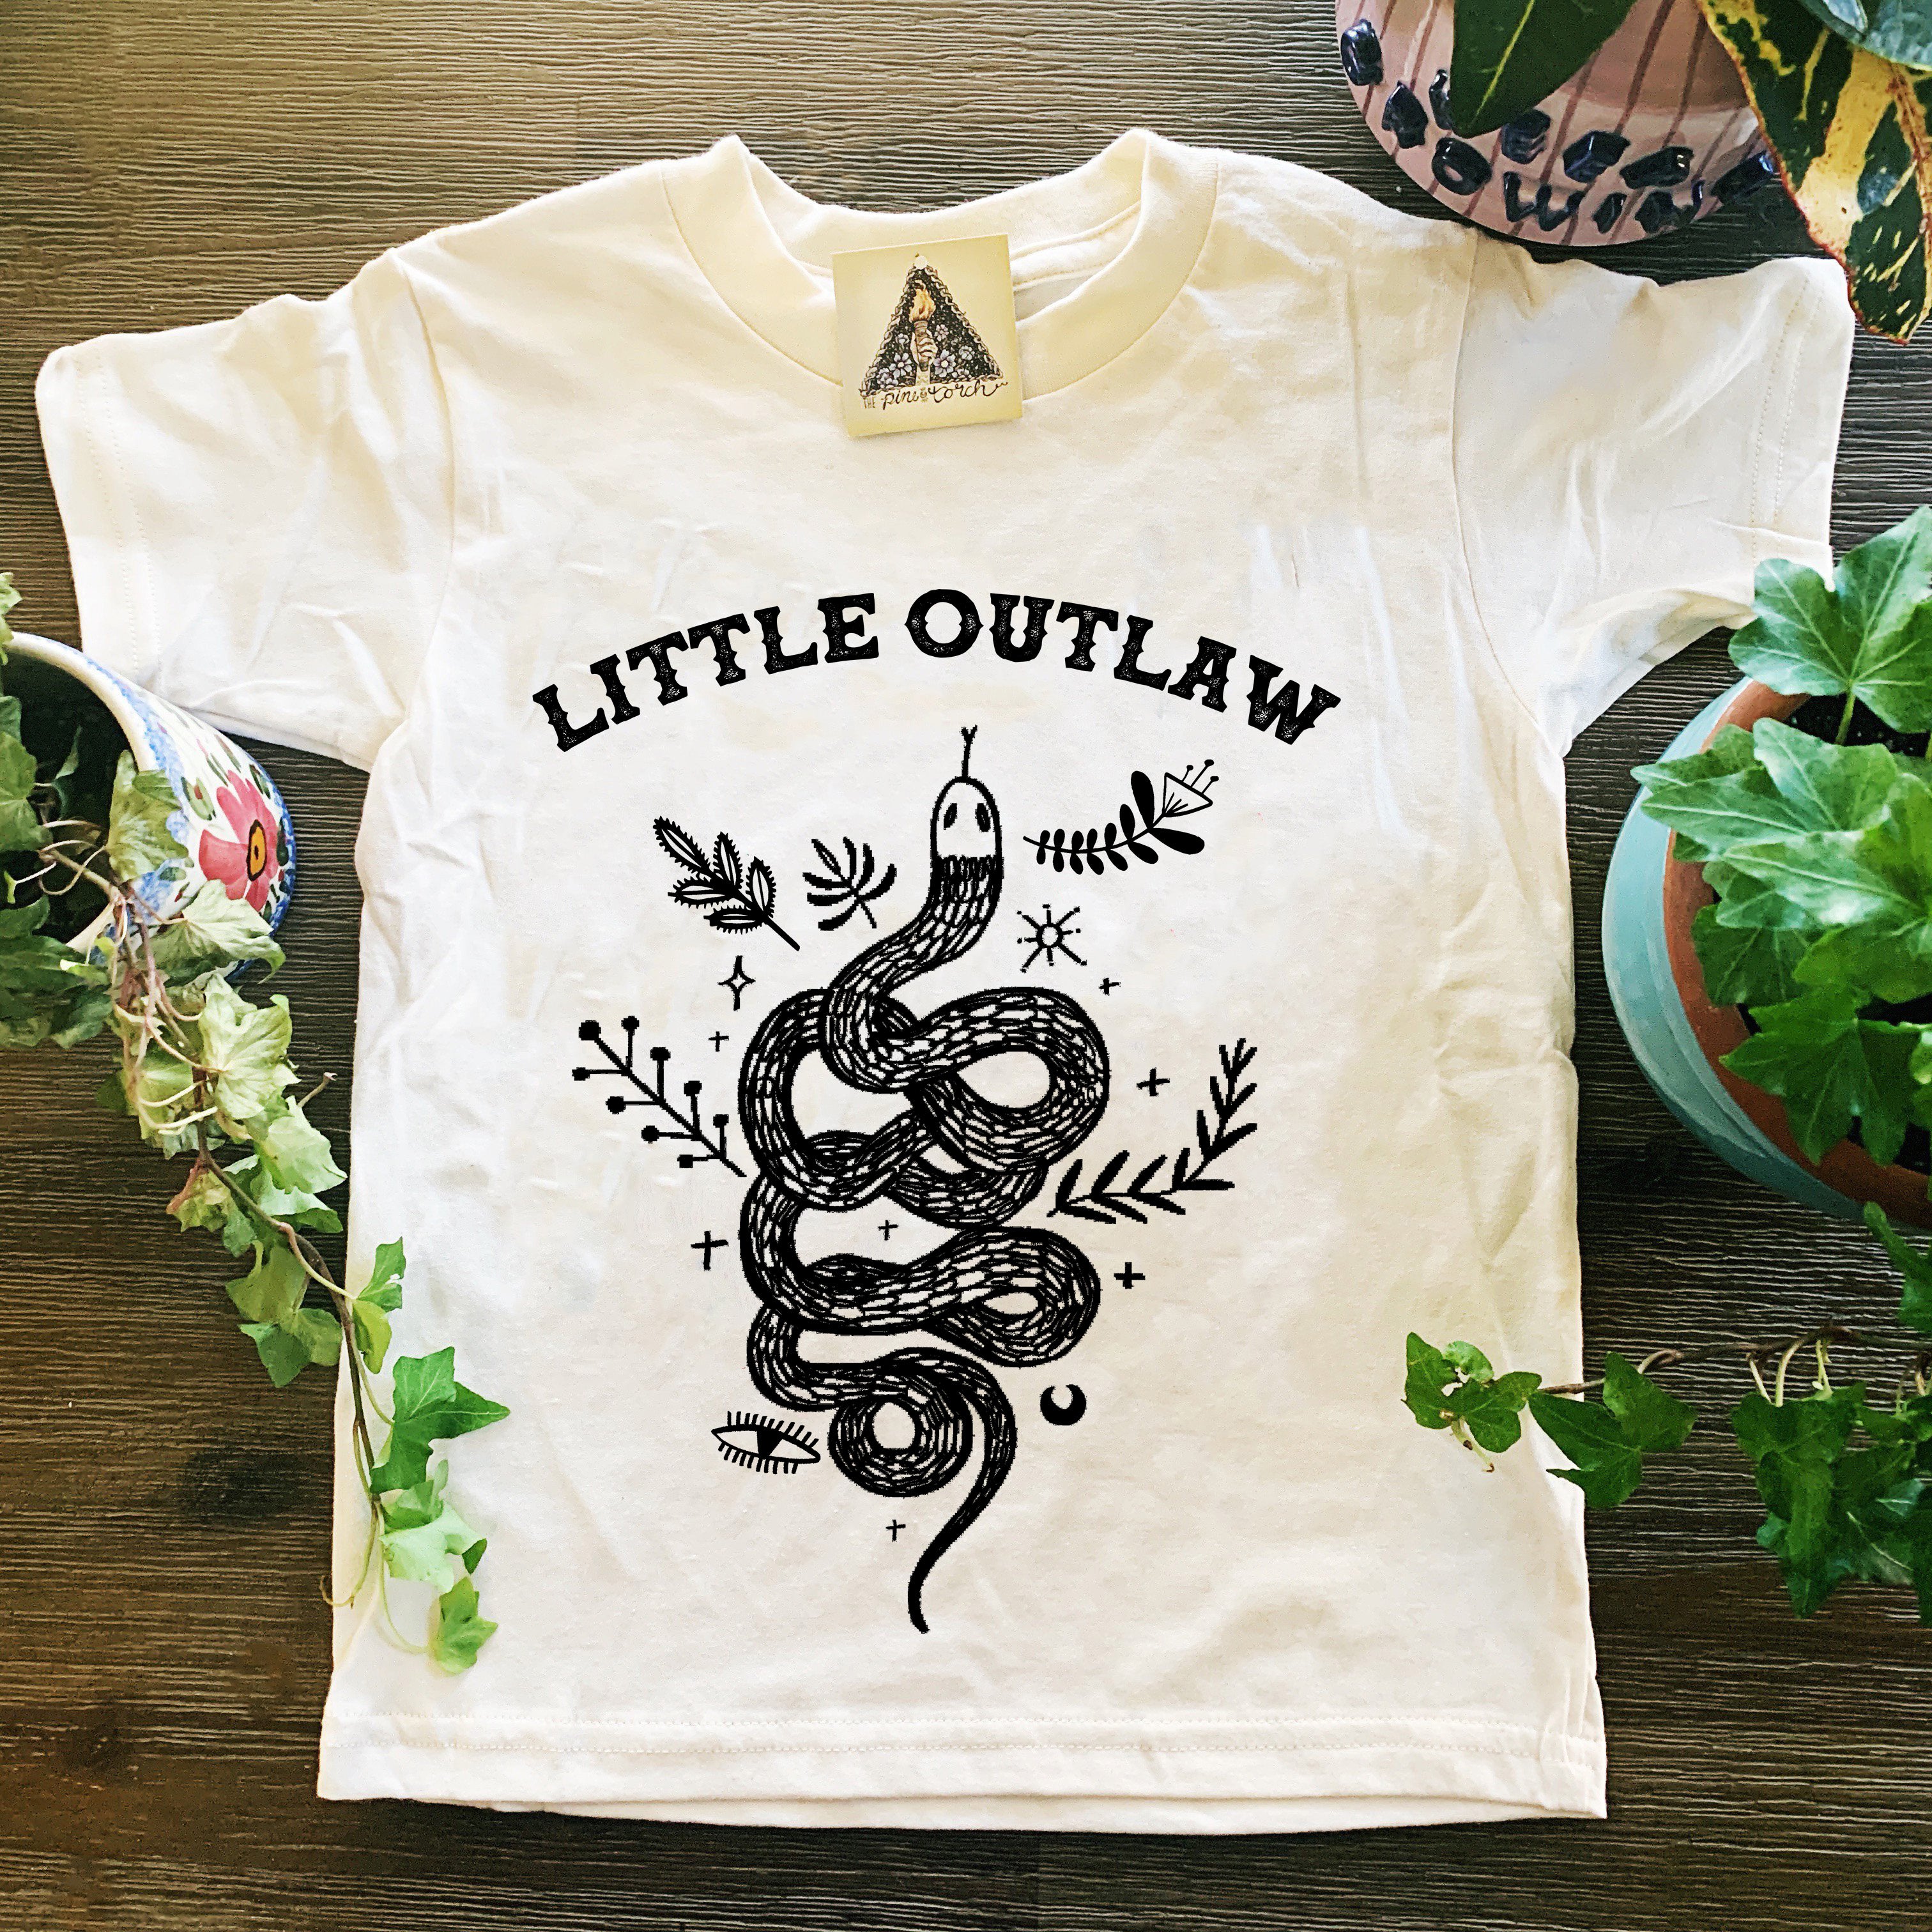 « LITTLE OUTLAW » KID'S TEE